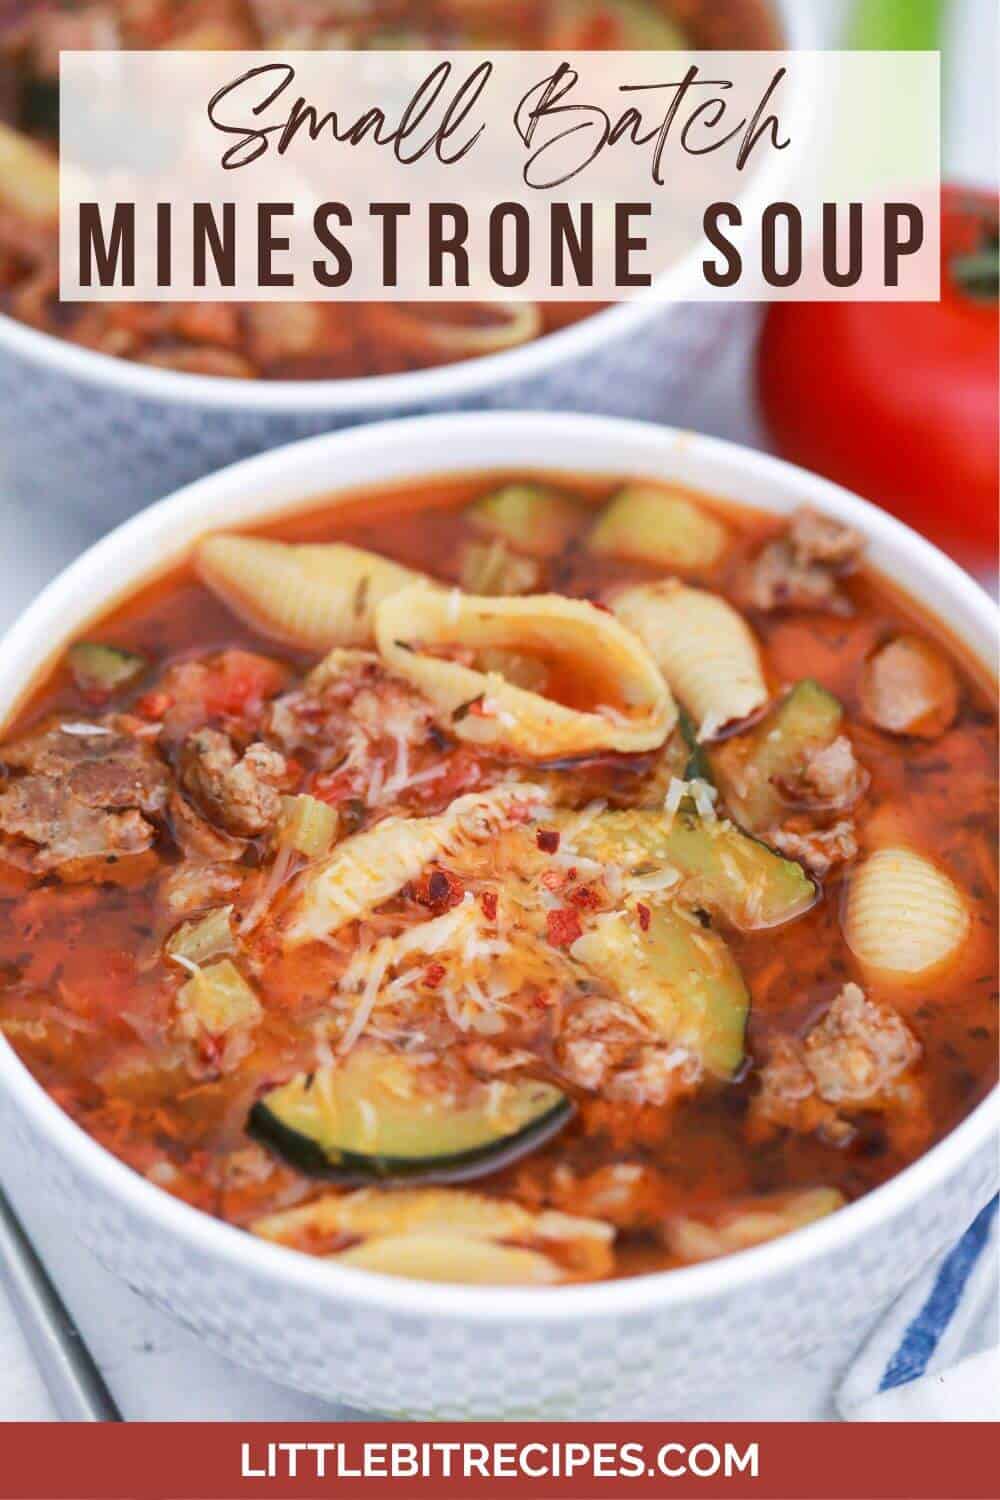 minestrone soup with text.